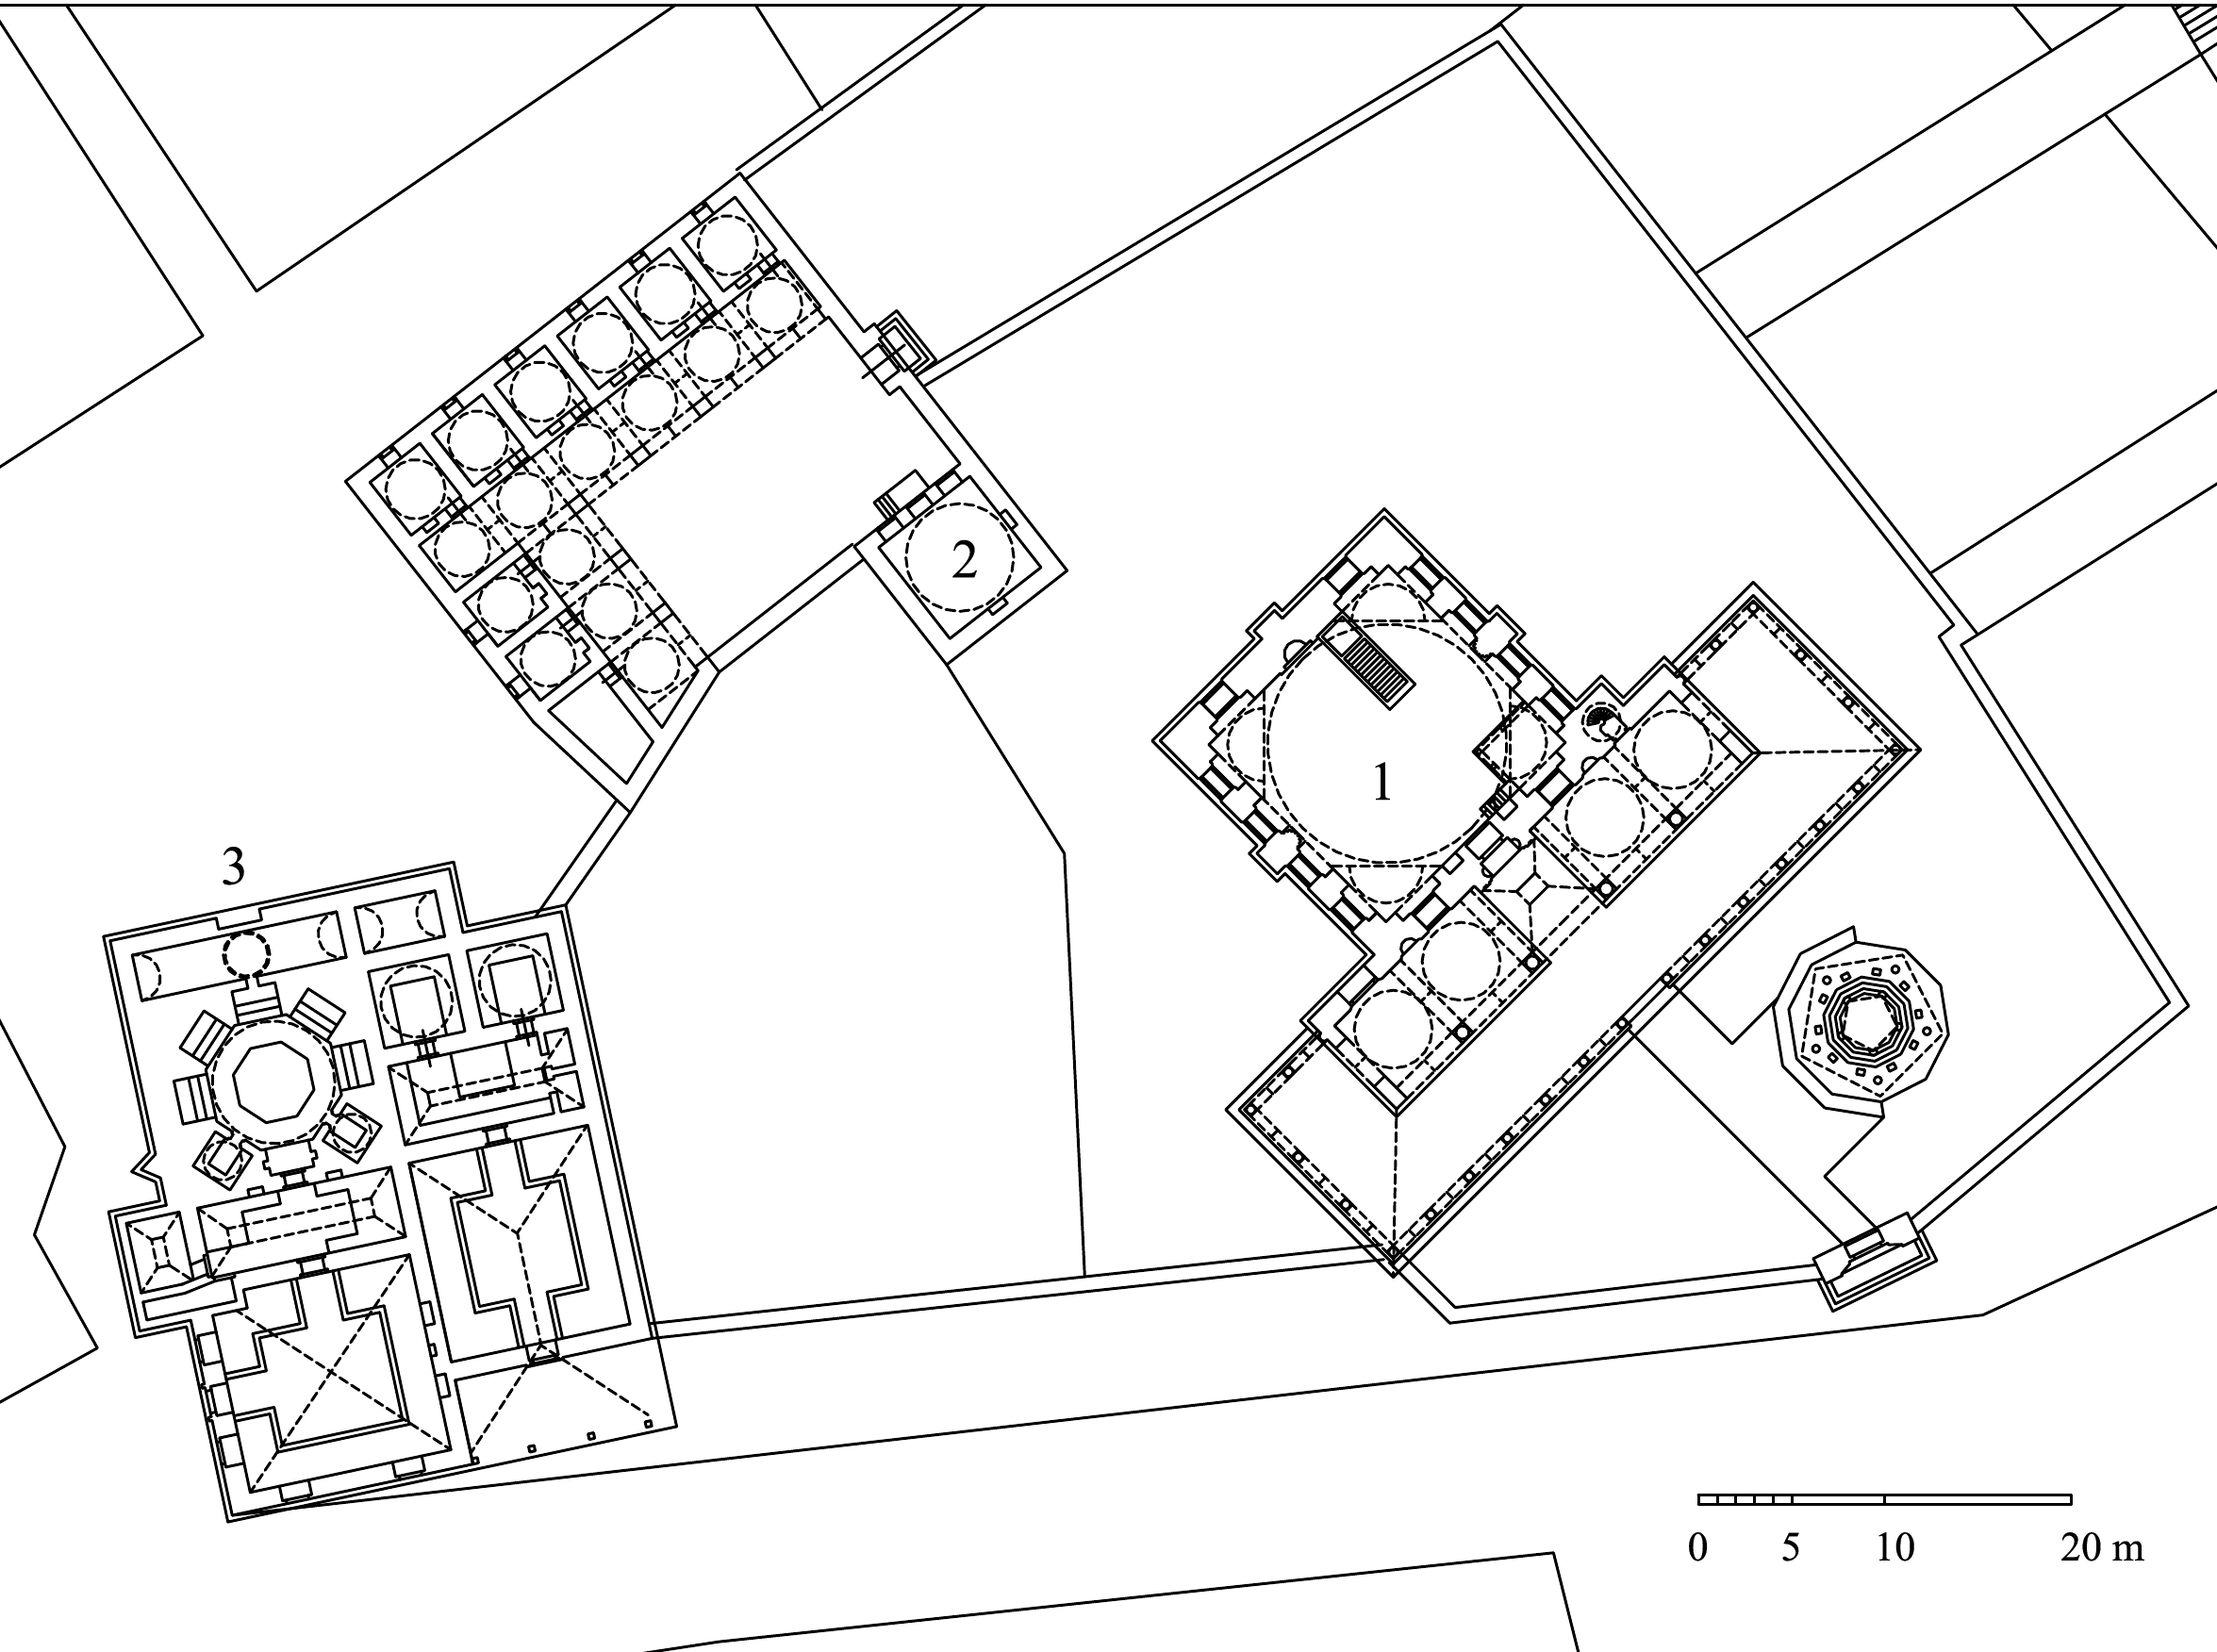 Rüstem Paşa Külliyesi - Floor plan of complex showing (1) mosque, (2) madrasa, (3) bathhouse. DWG file in AutoCAD 2000 format. Click the download button to download a zipped file containing the .dwg file.